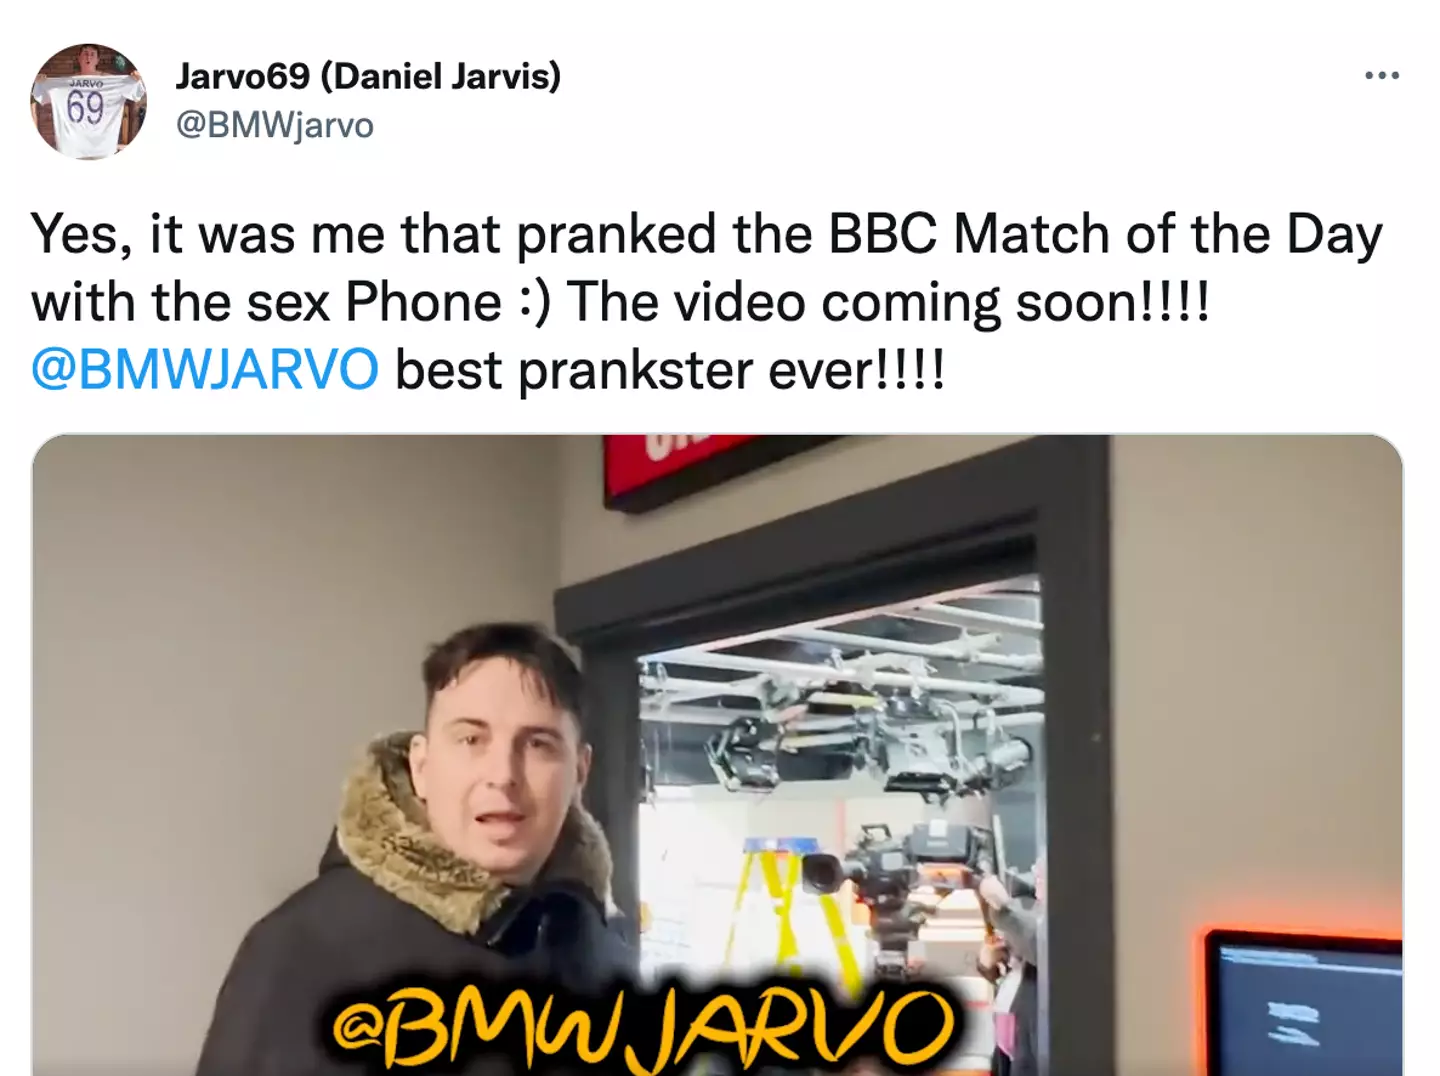 Jarvo said his prank will 'go down in history'.